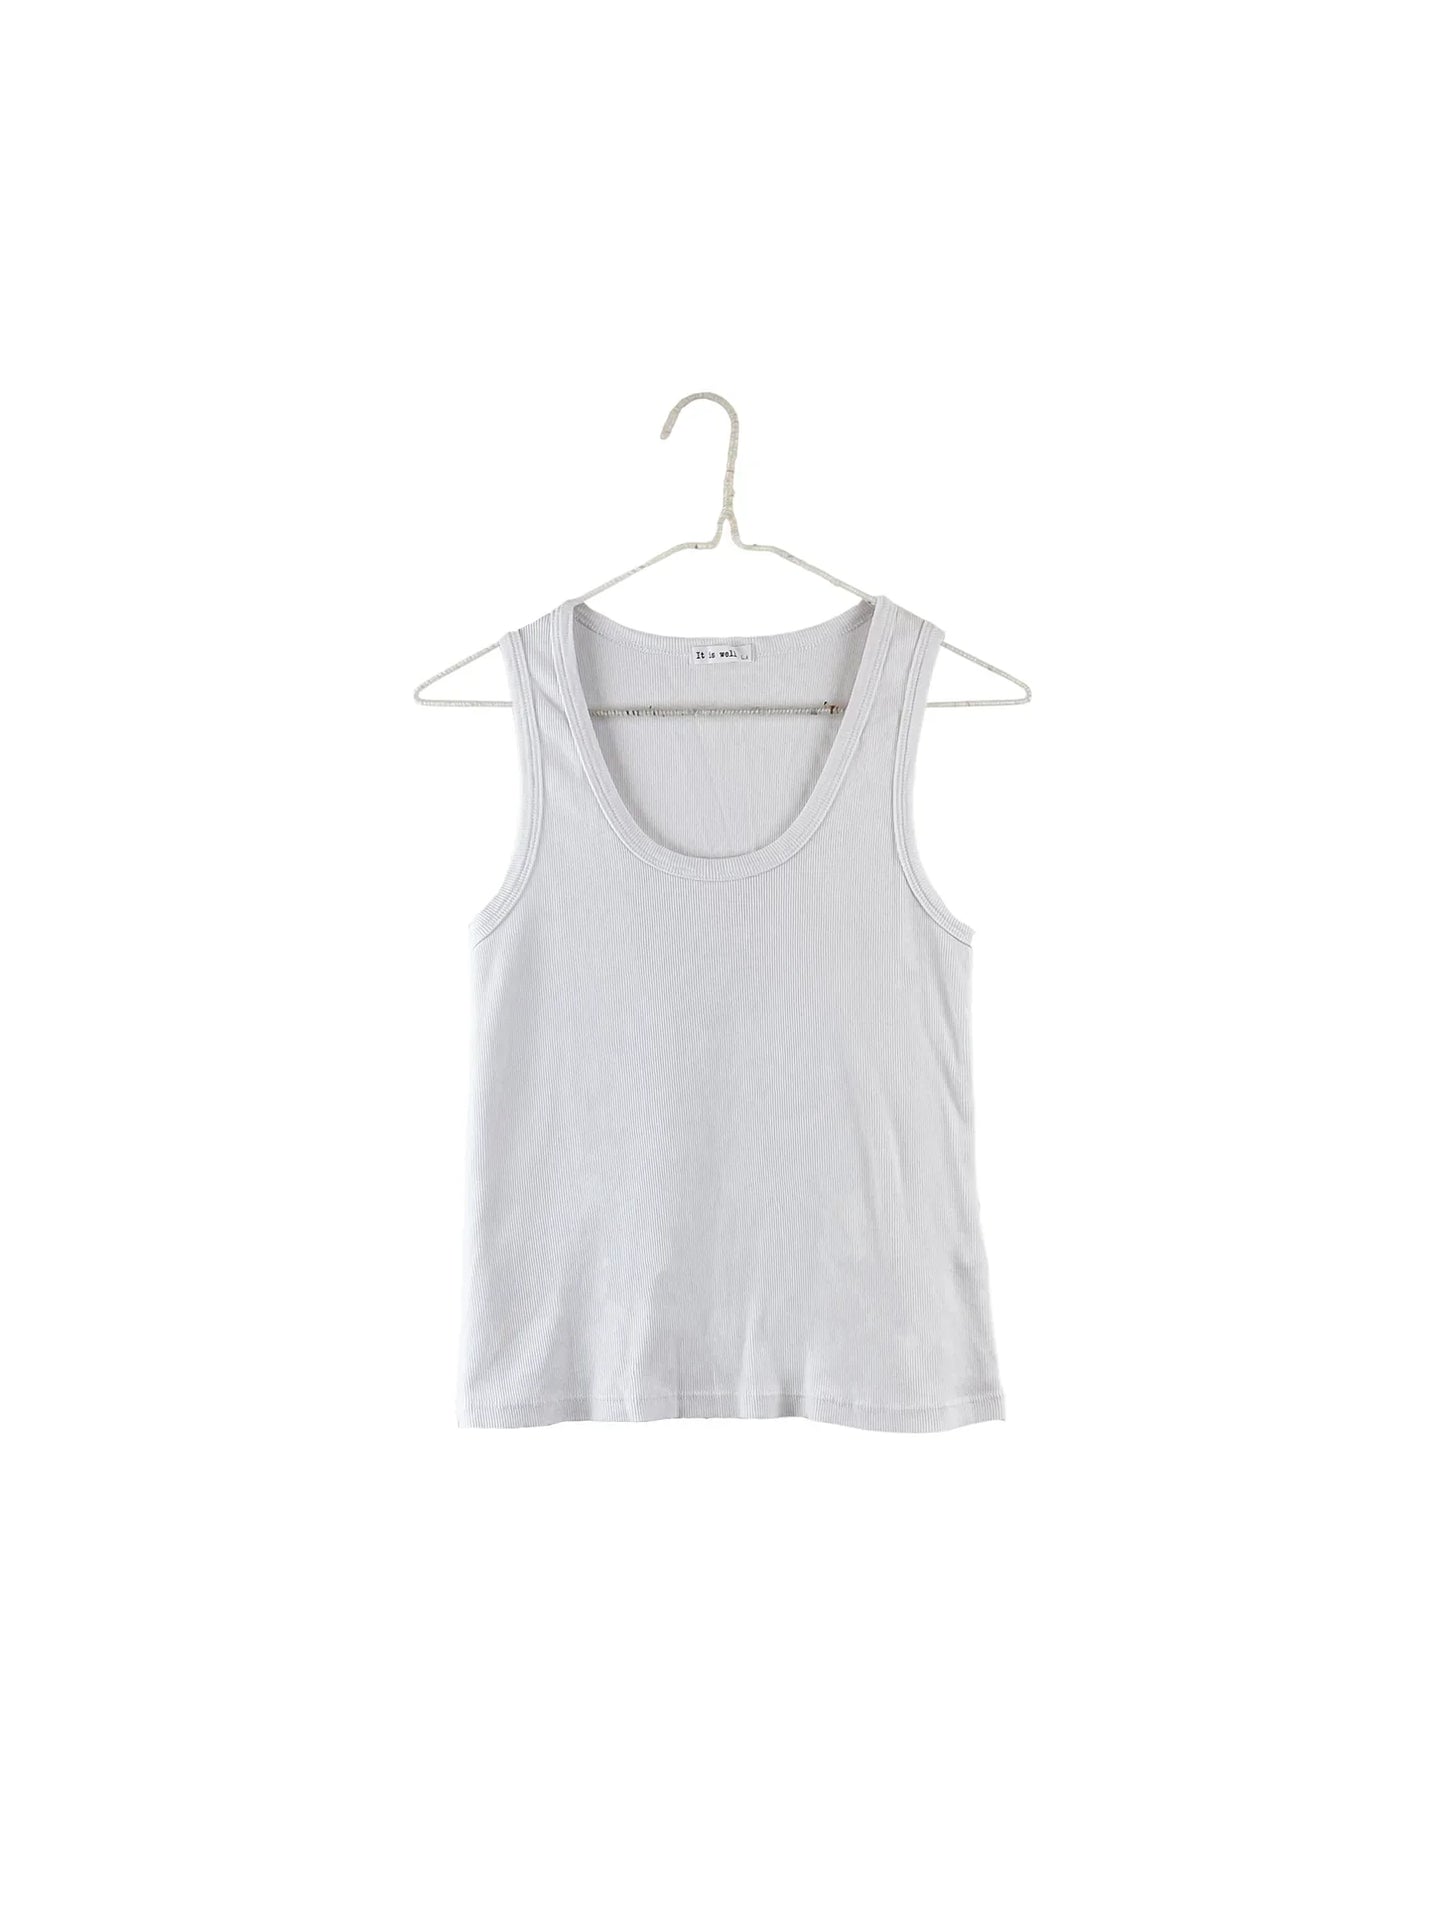 It is Well L.A - SS24 - Rib Tank Top in Salt - on display front 2